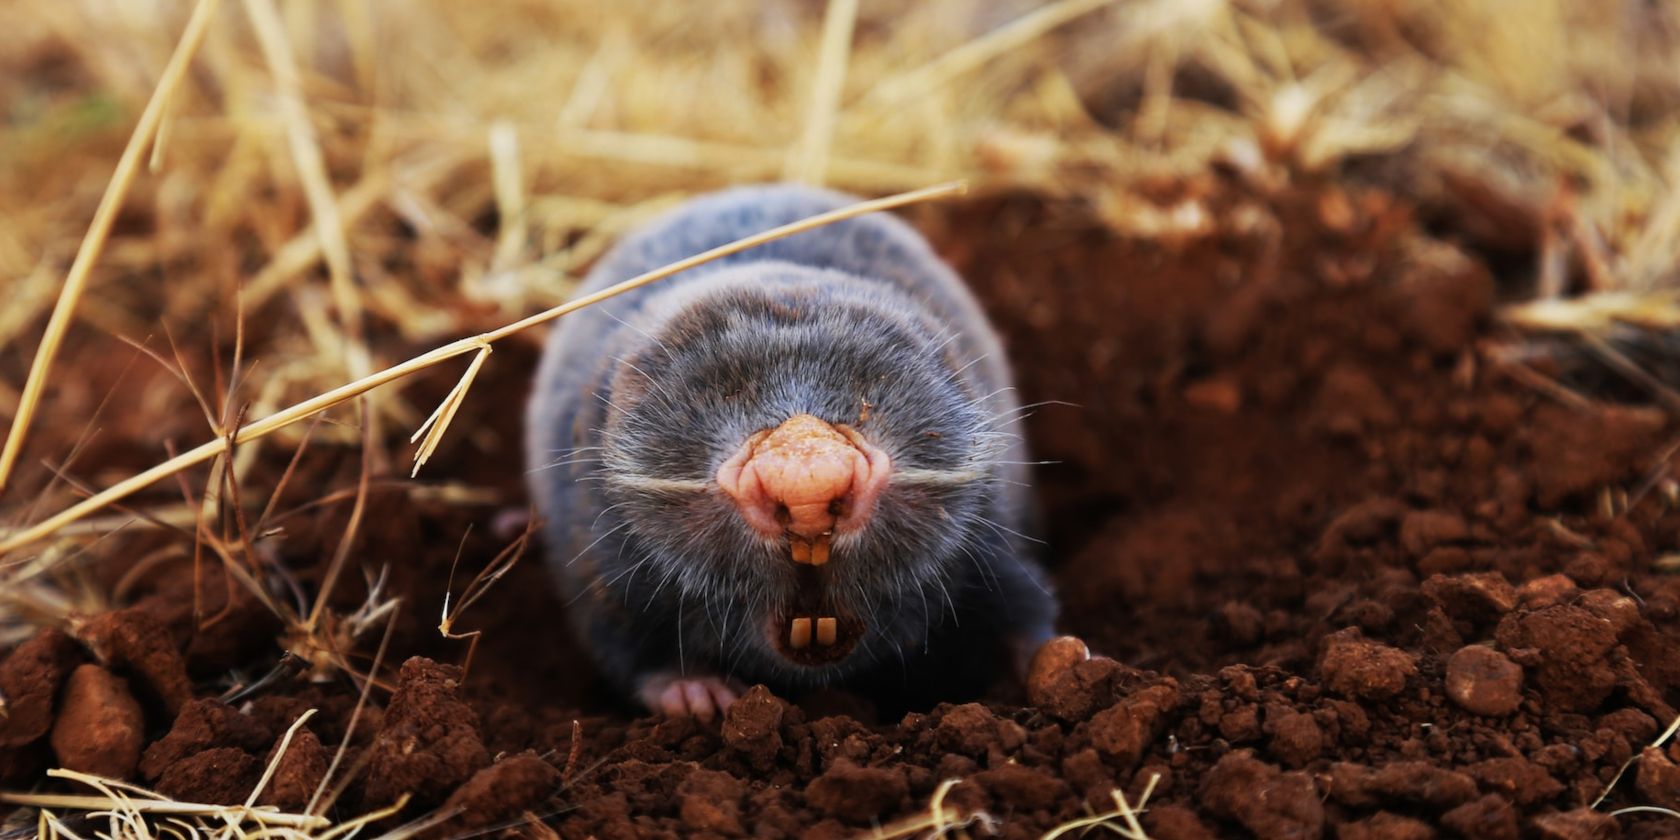 a mole emerging from its hole